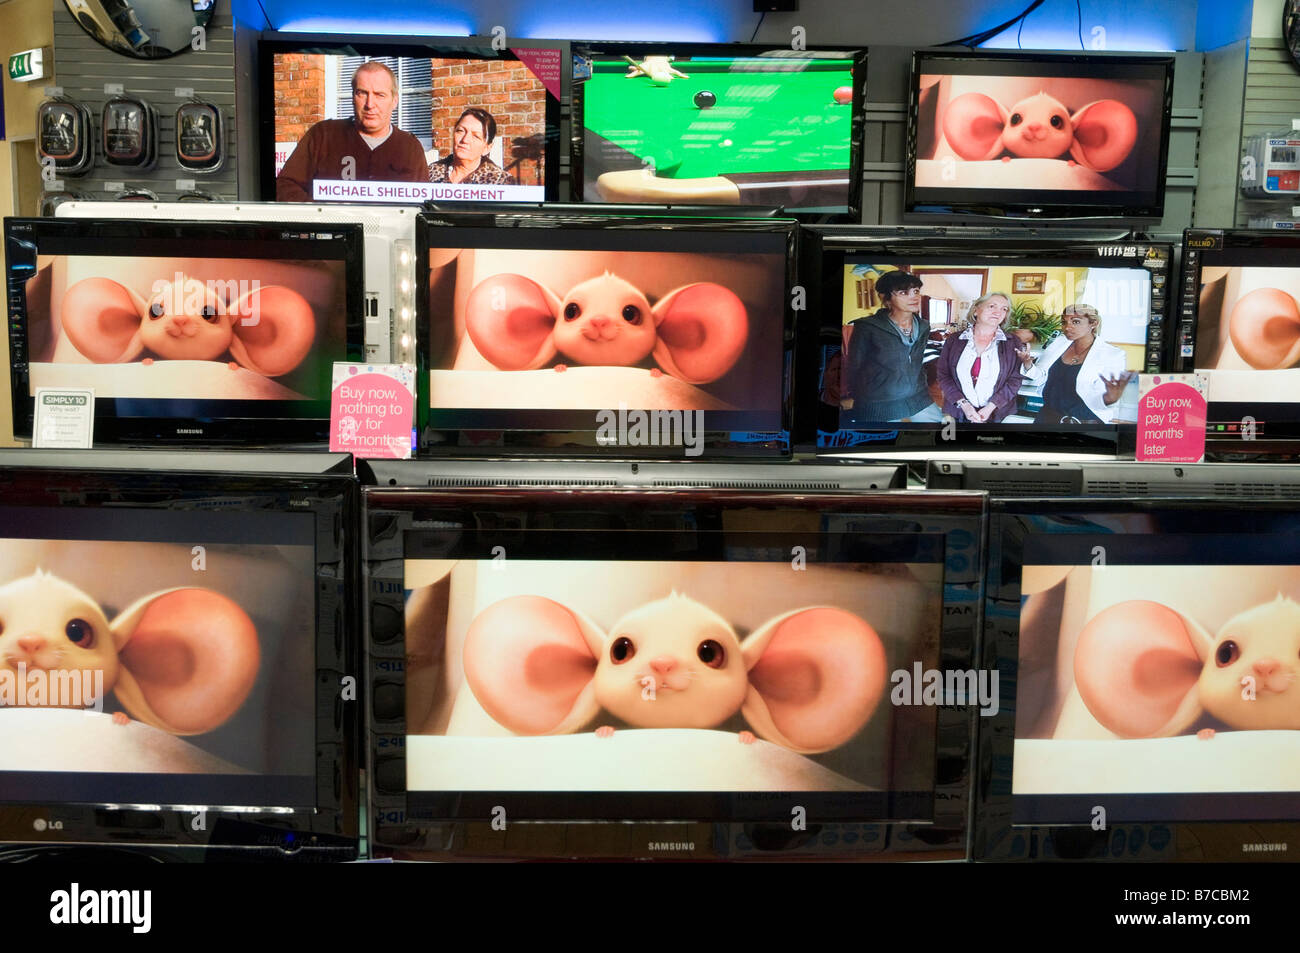 Widescreen televisions for sale in Currys Digital, England, UK Stock Photo